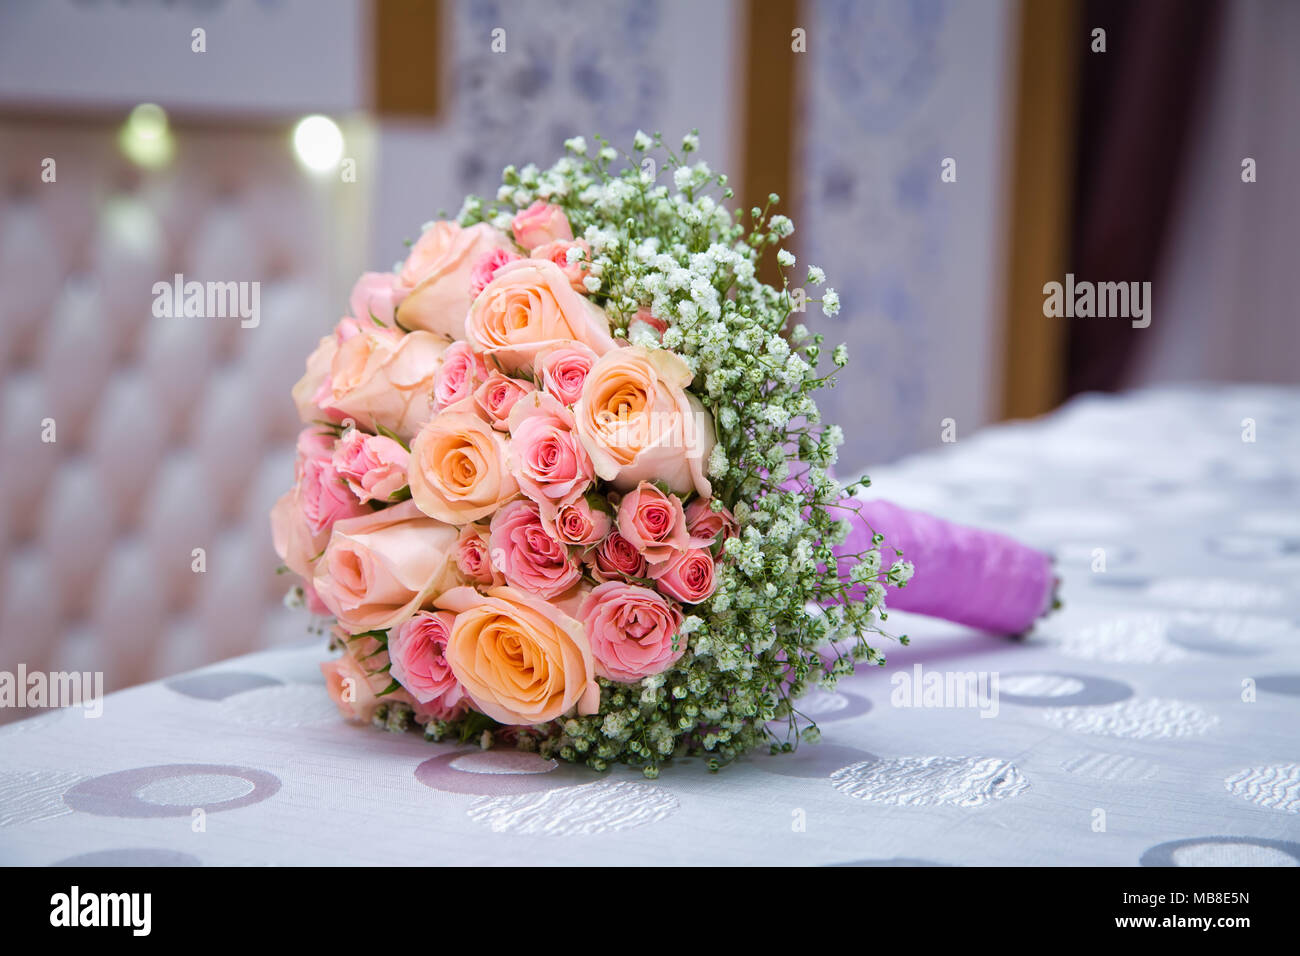 Wedding Bouquet Roses Orange High Resolution Stock Photography And Images Alamy